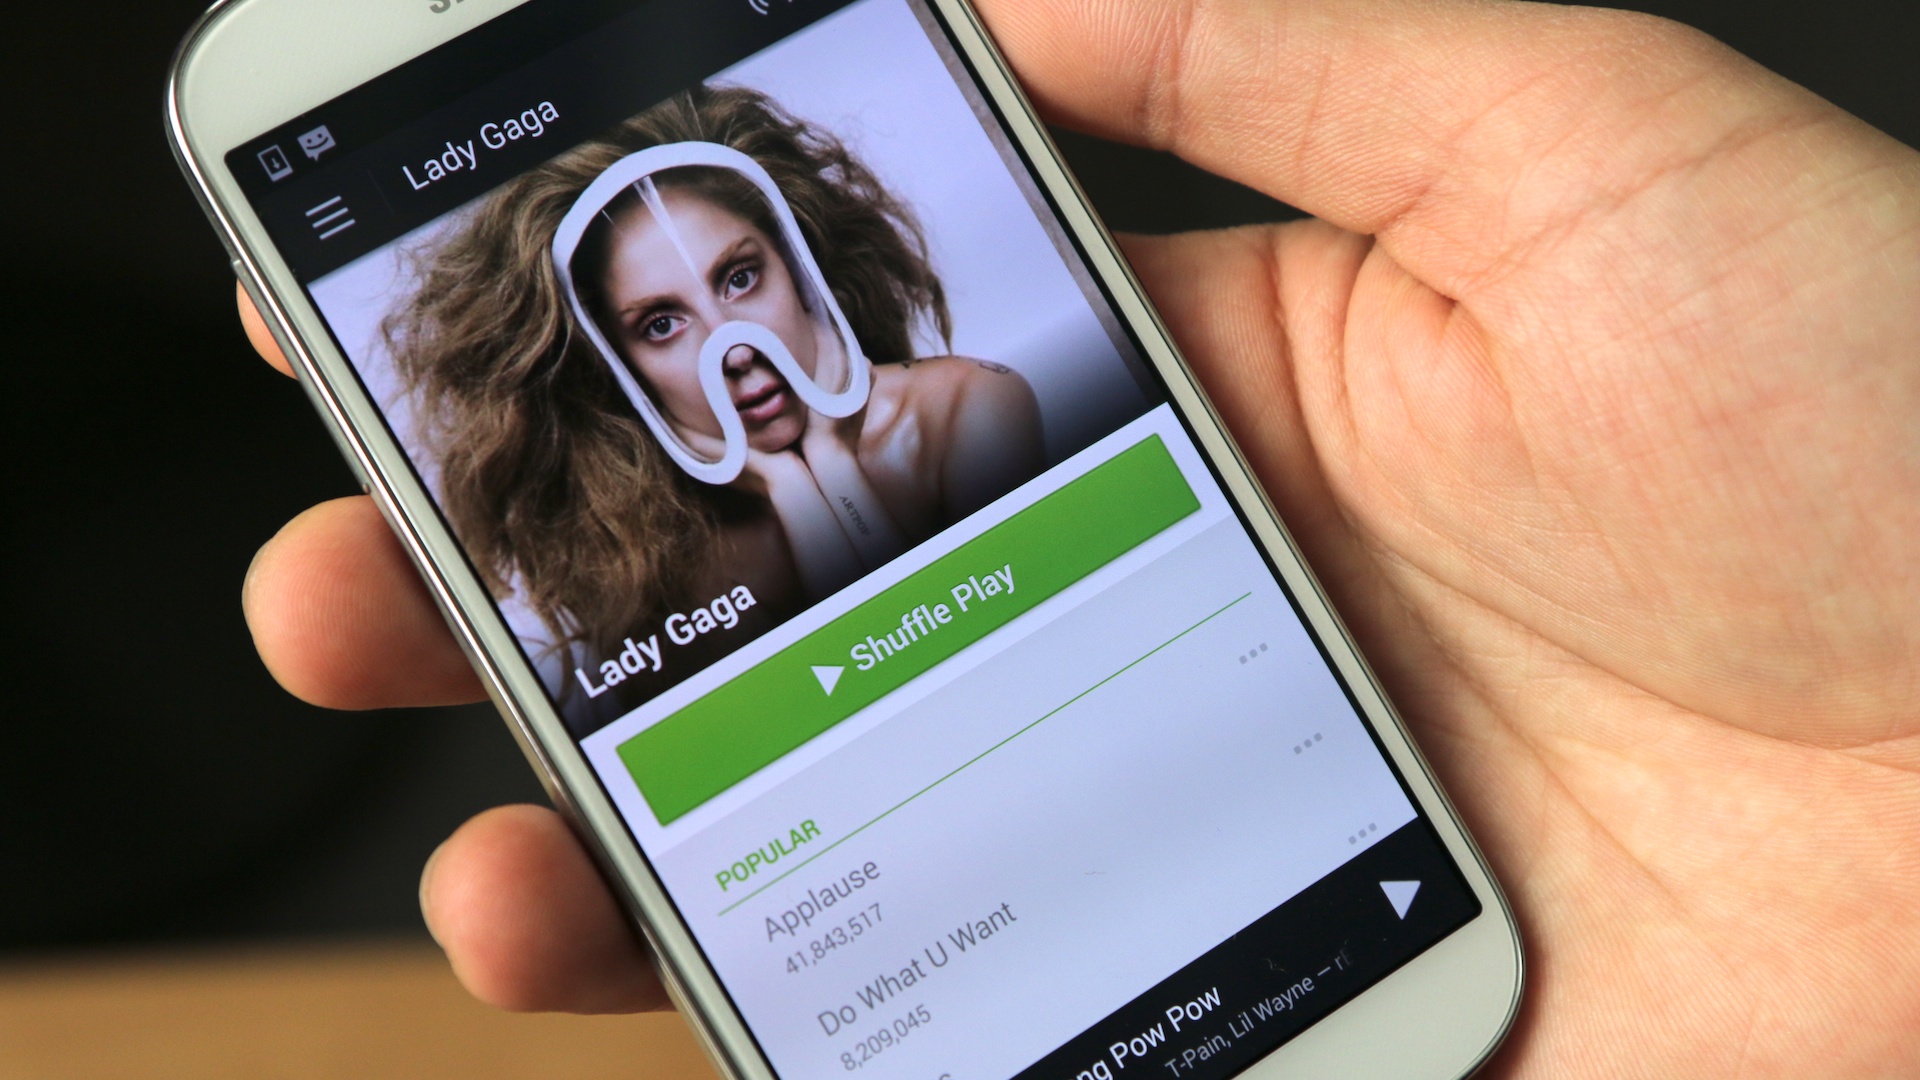 You Can Listen To Spotify (And Led Zeppelin) On Your Phone For Free